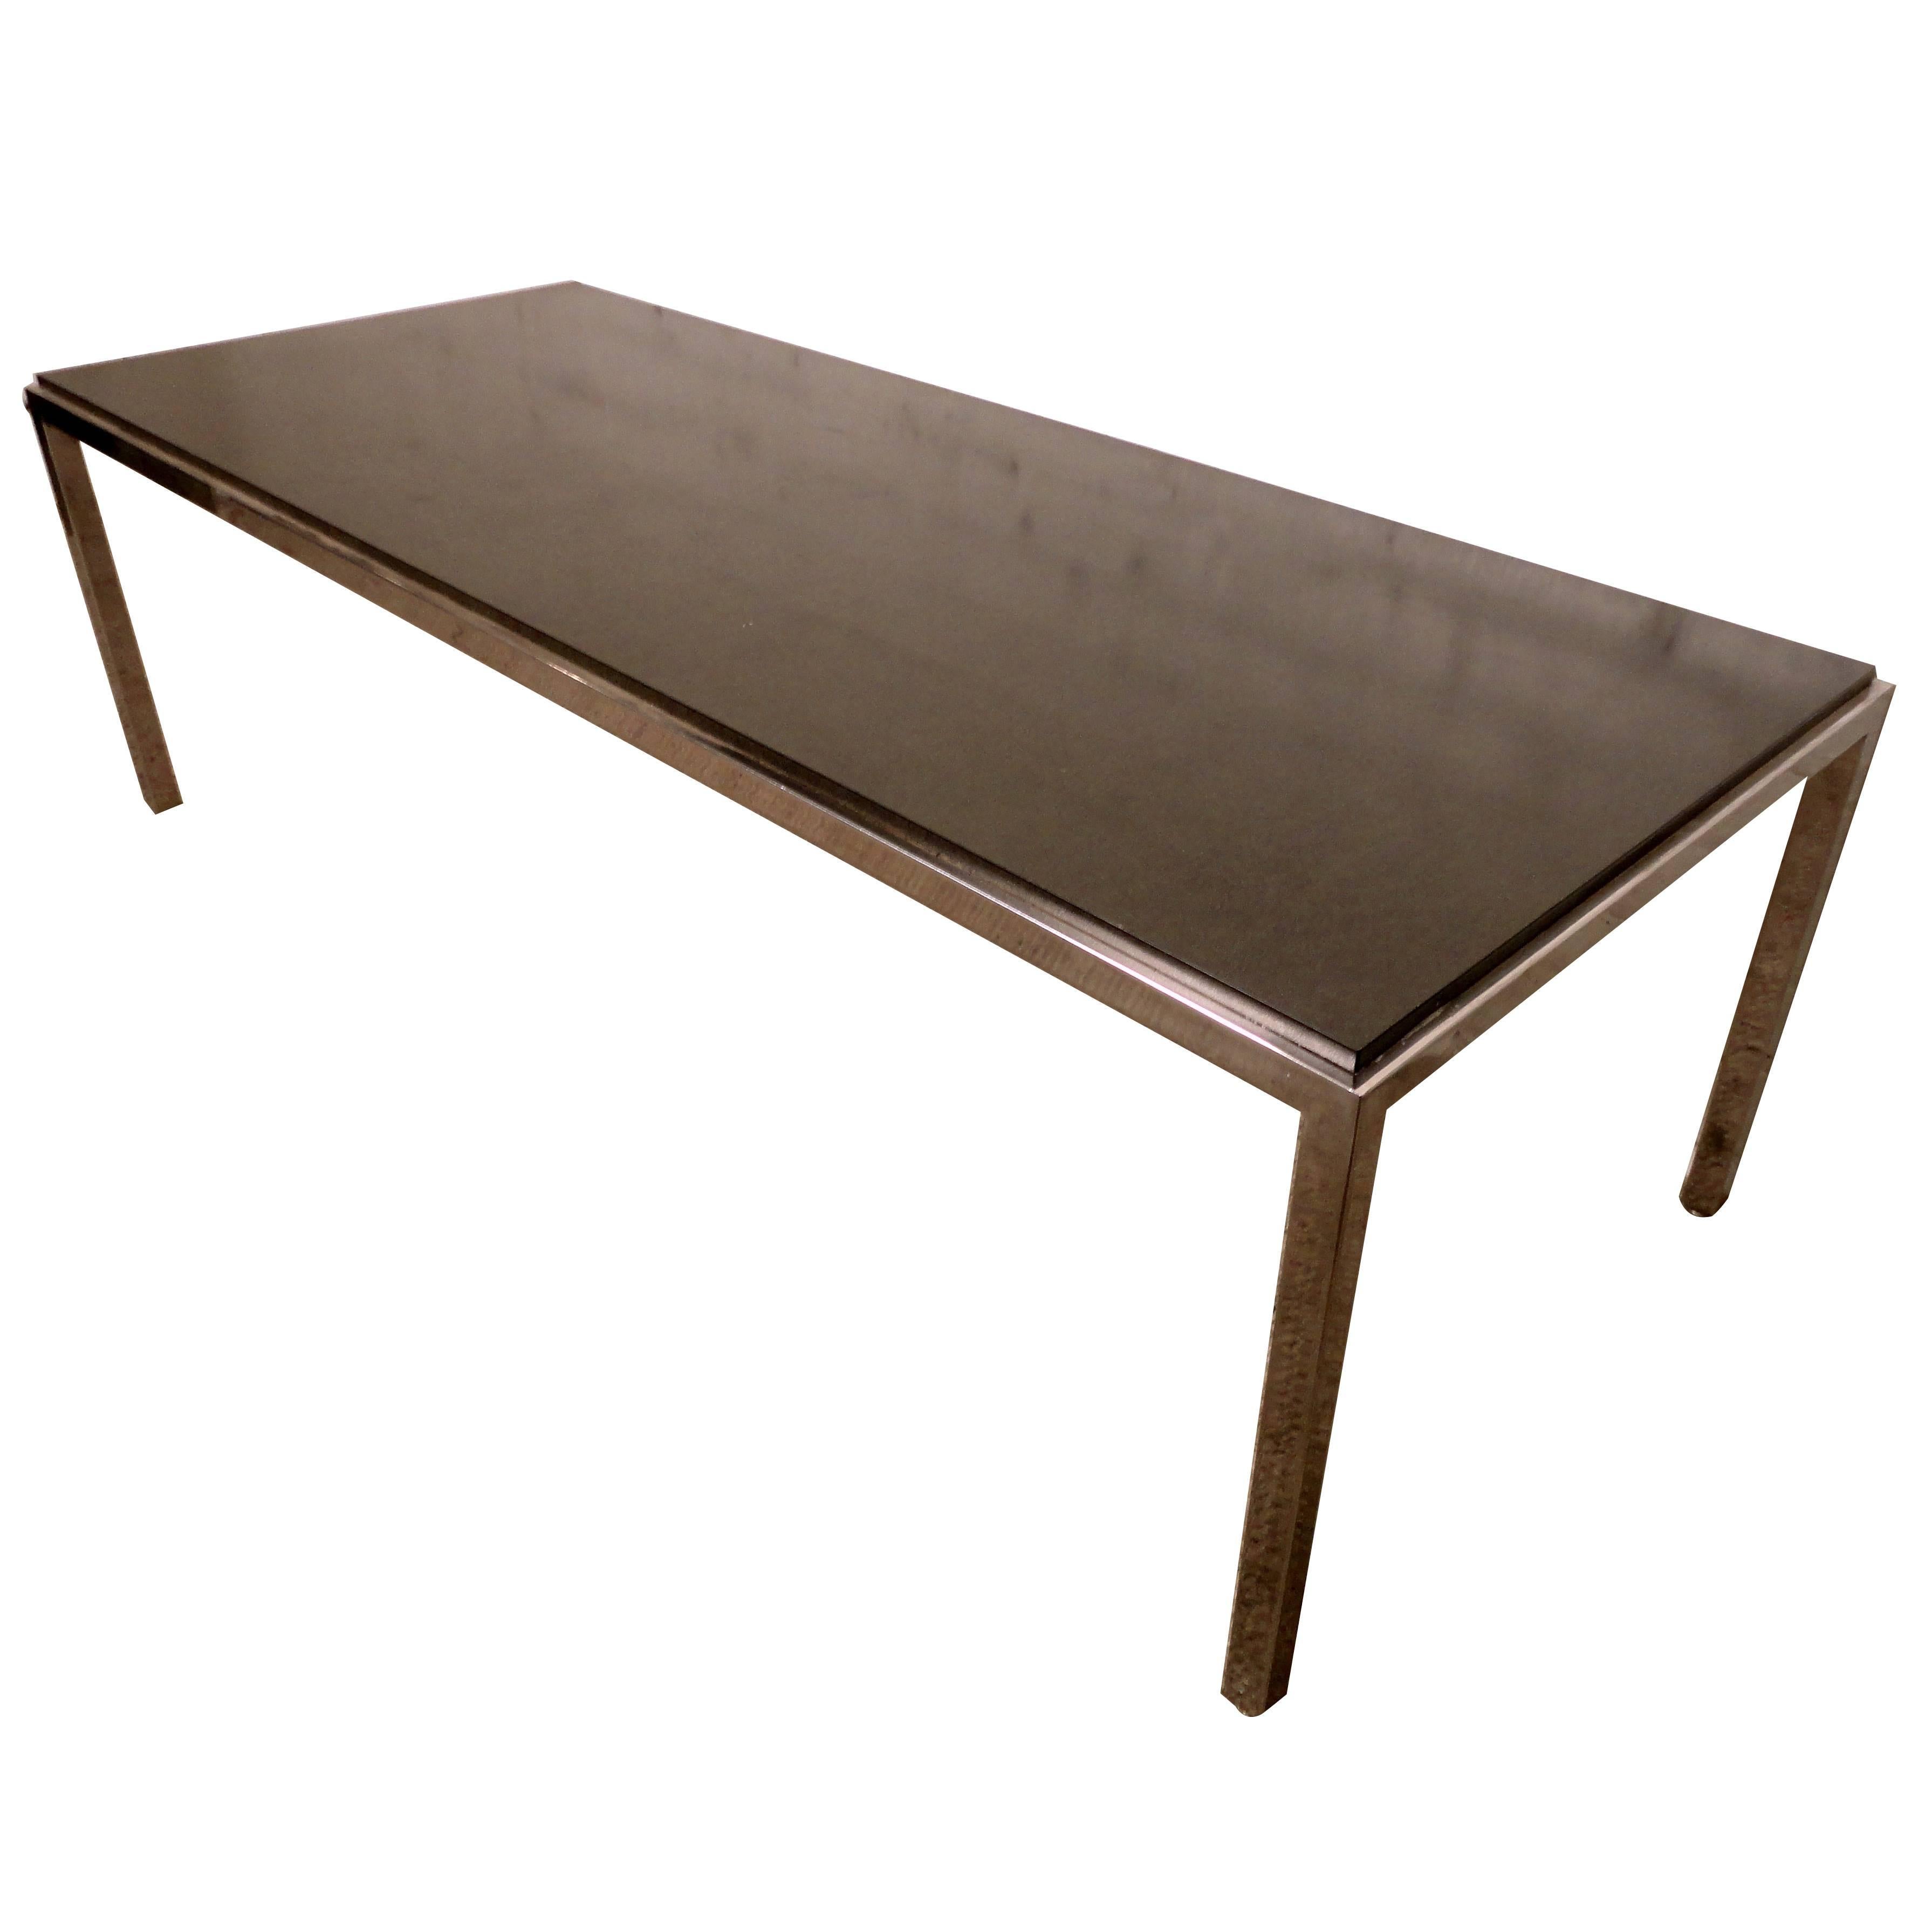 Sleek Mid-Century Chrome & Black Top Coffee Table by Directional